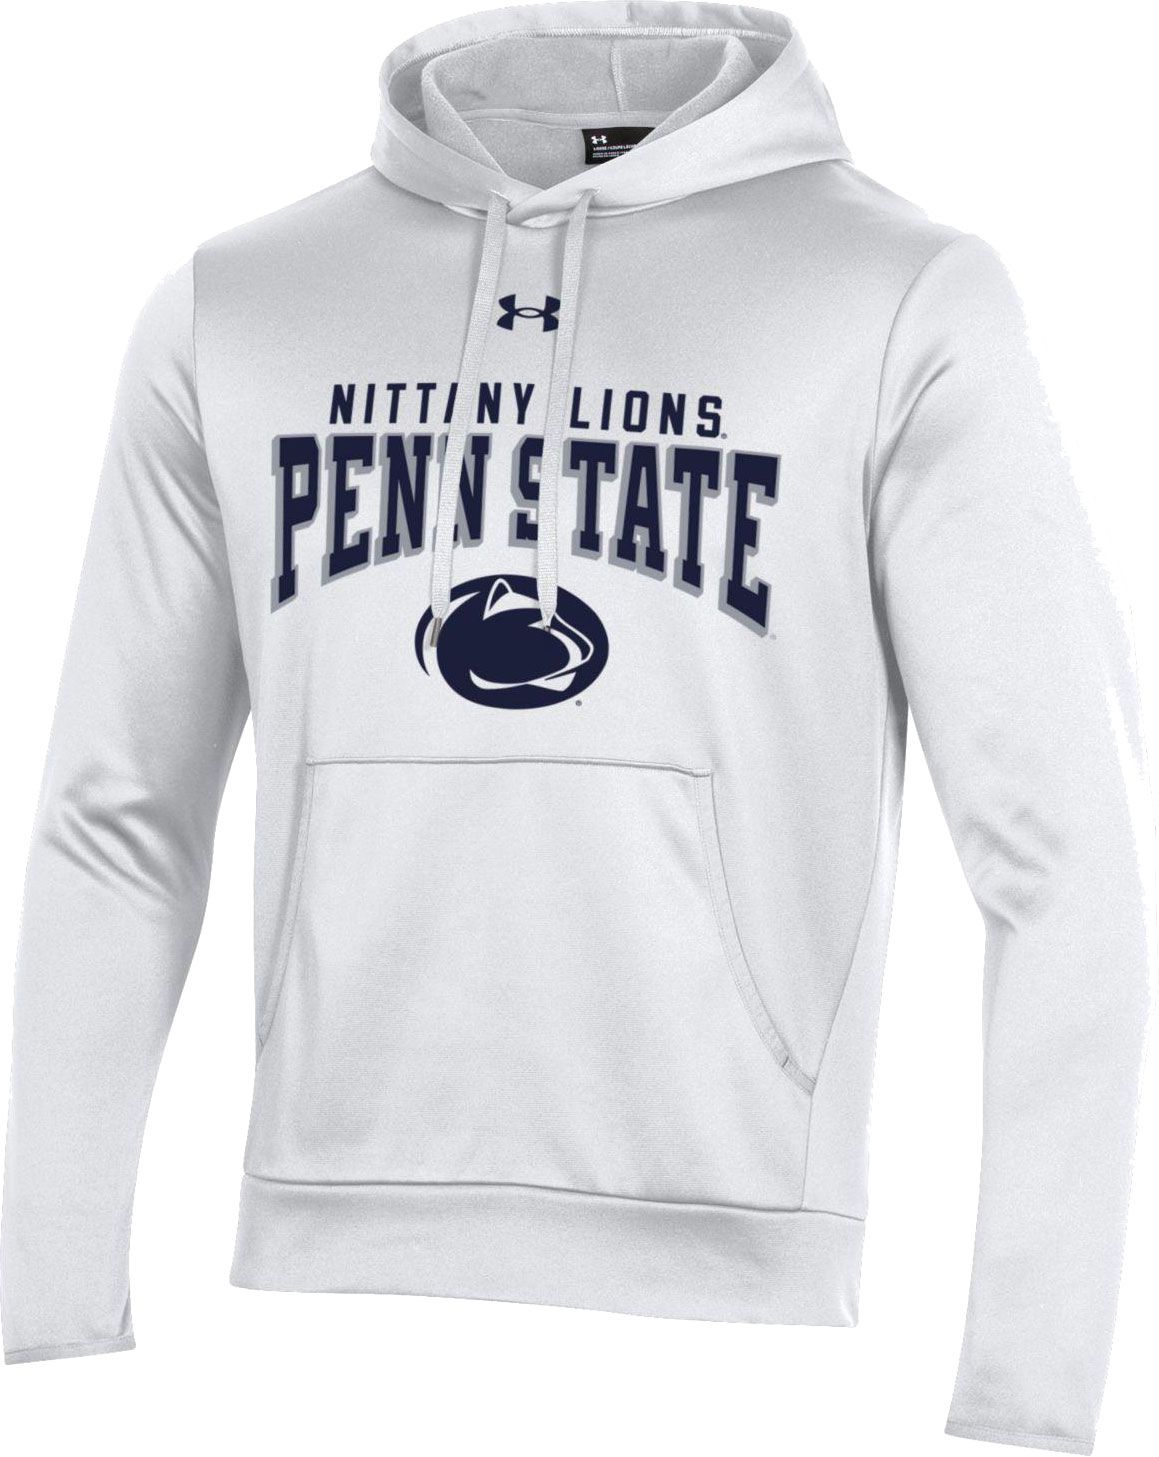 penn state under armour jacket